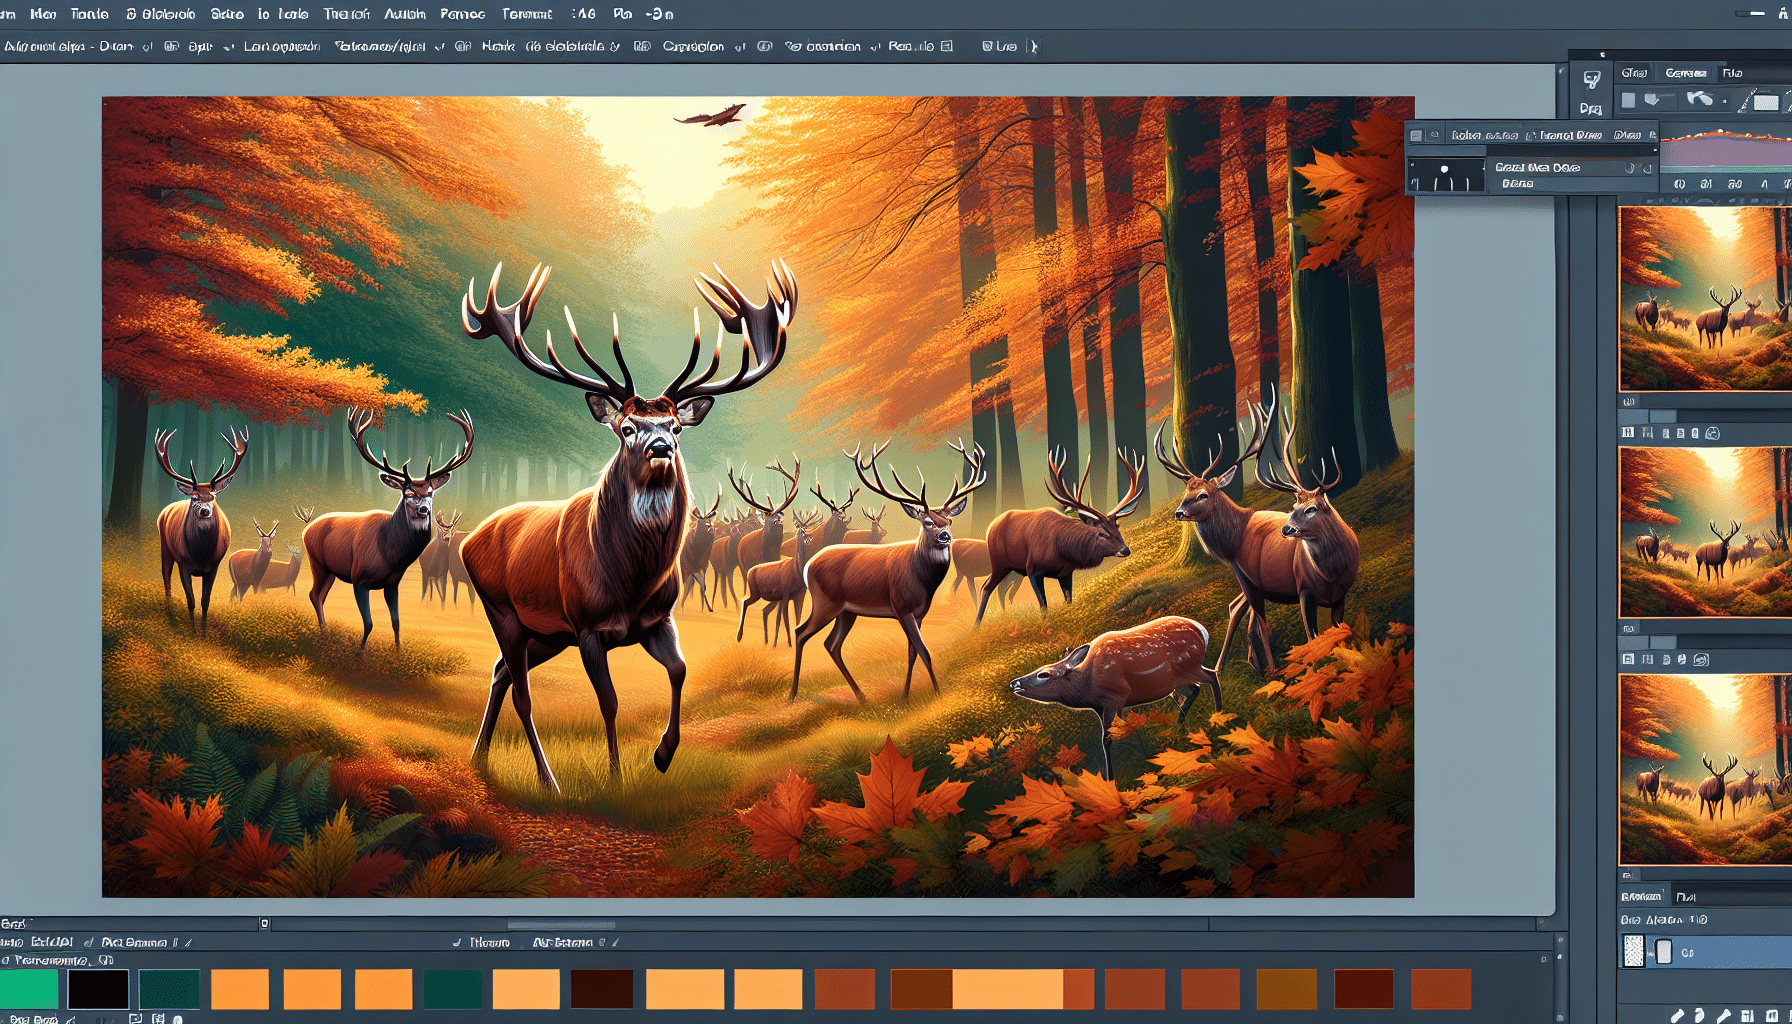 Illustrate a vivid autumn forest landscape featuring a herd of majestic deer moving about. Showcase a large male deer with robust antlers indicating the onset of the 'Pre-Rut' phase in their behavior pattern. Make sure the environment is indicative of the hunting season, with fallen leaves and a cool ambiance. Exclude any human presence, text, and brand logos in the scene, maintaining its natural beauty and dynamics.